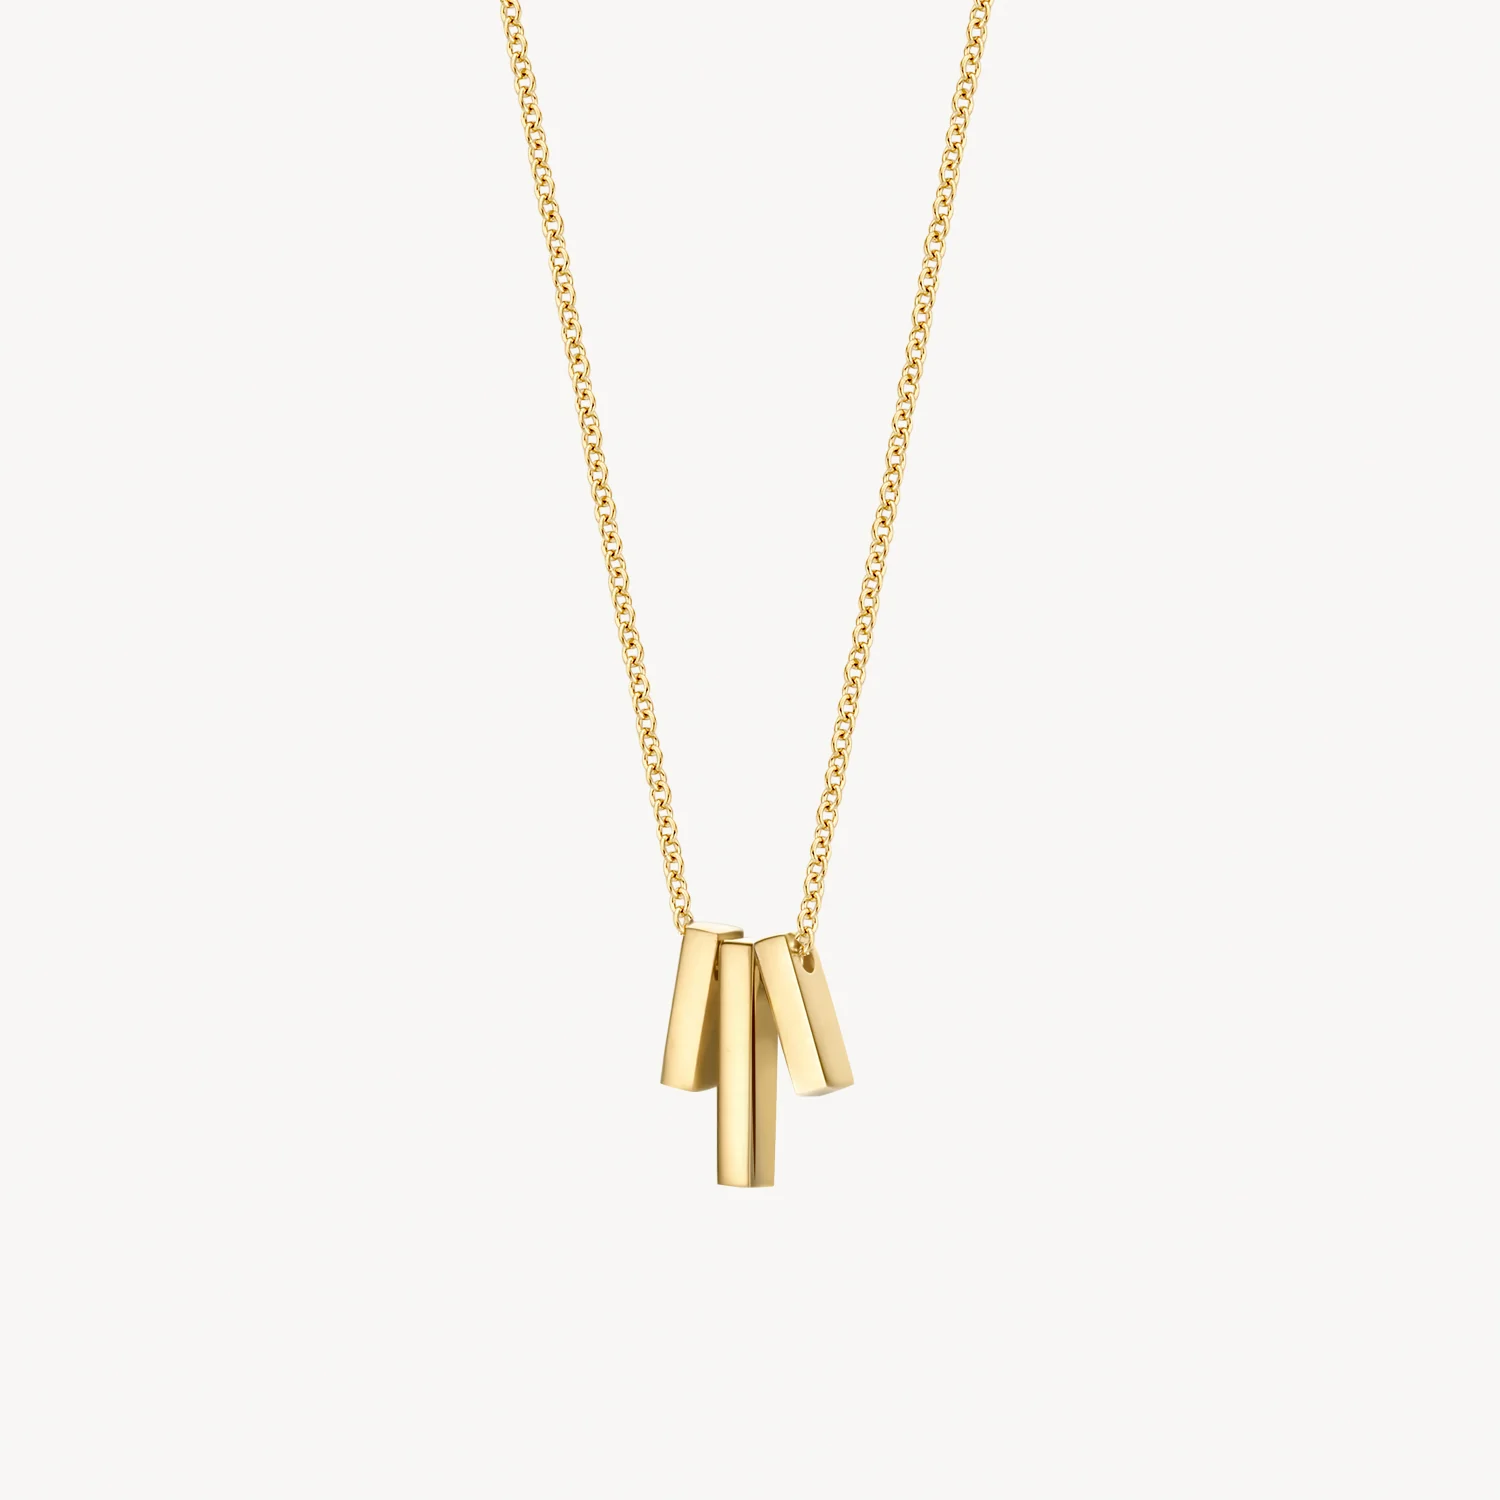 Blush Yellow Gold 3-Bars Necklace